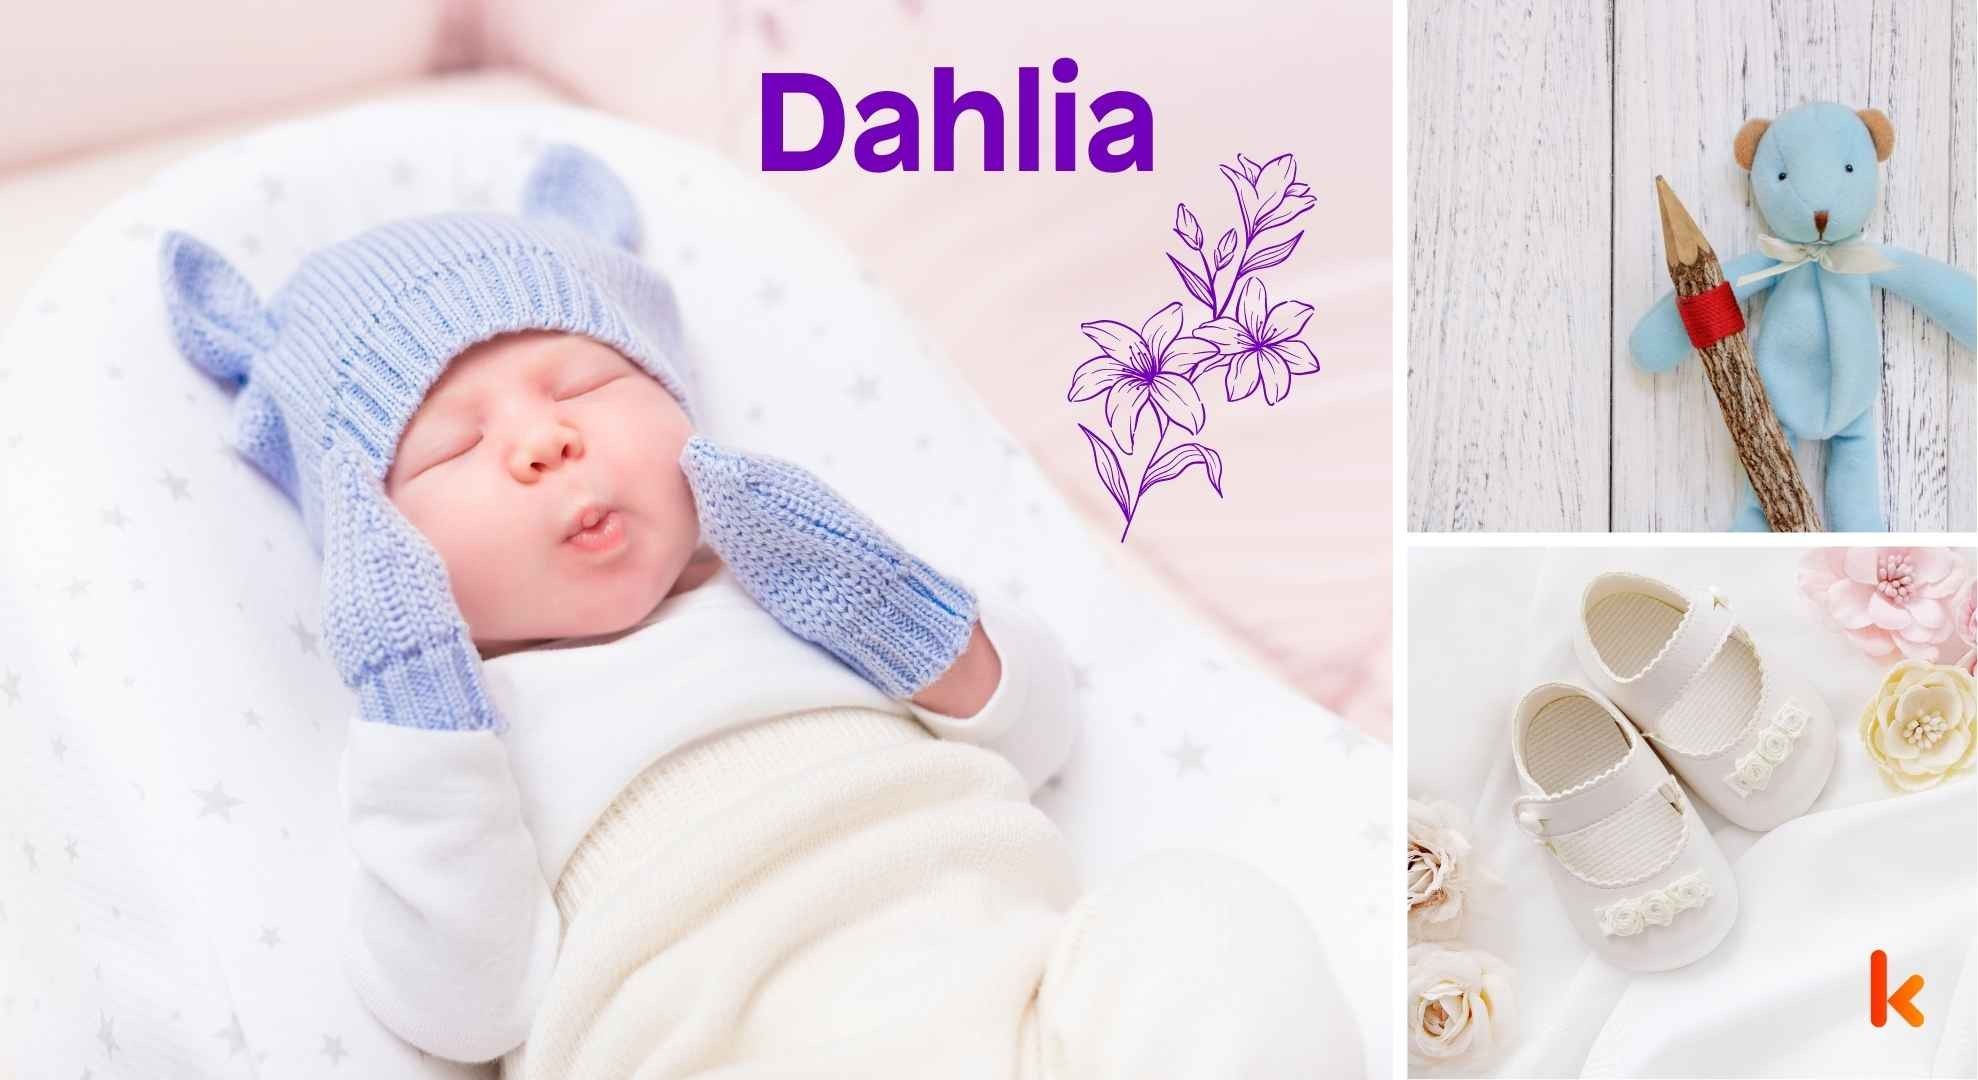 Meaning of the name Dahlia